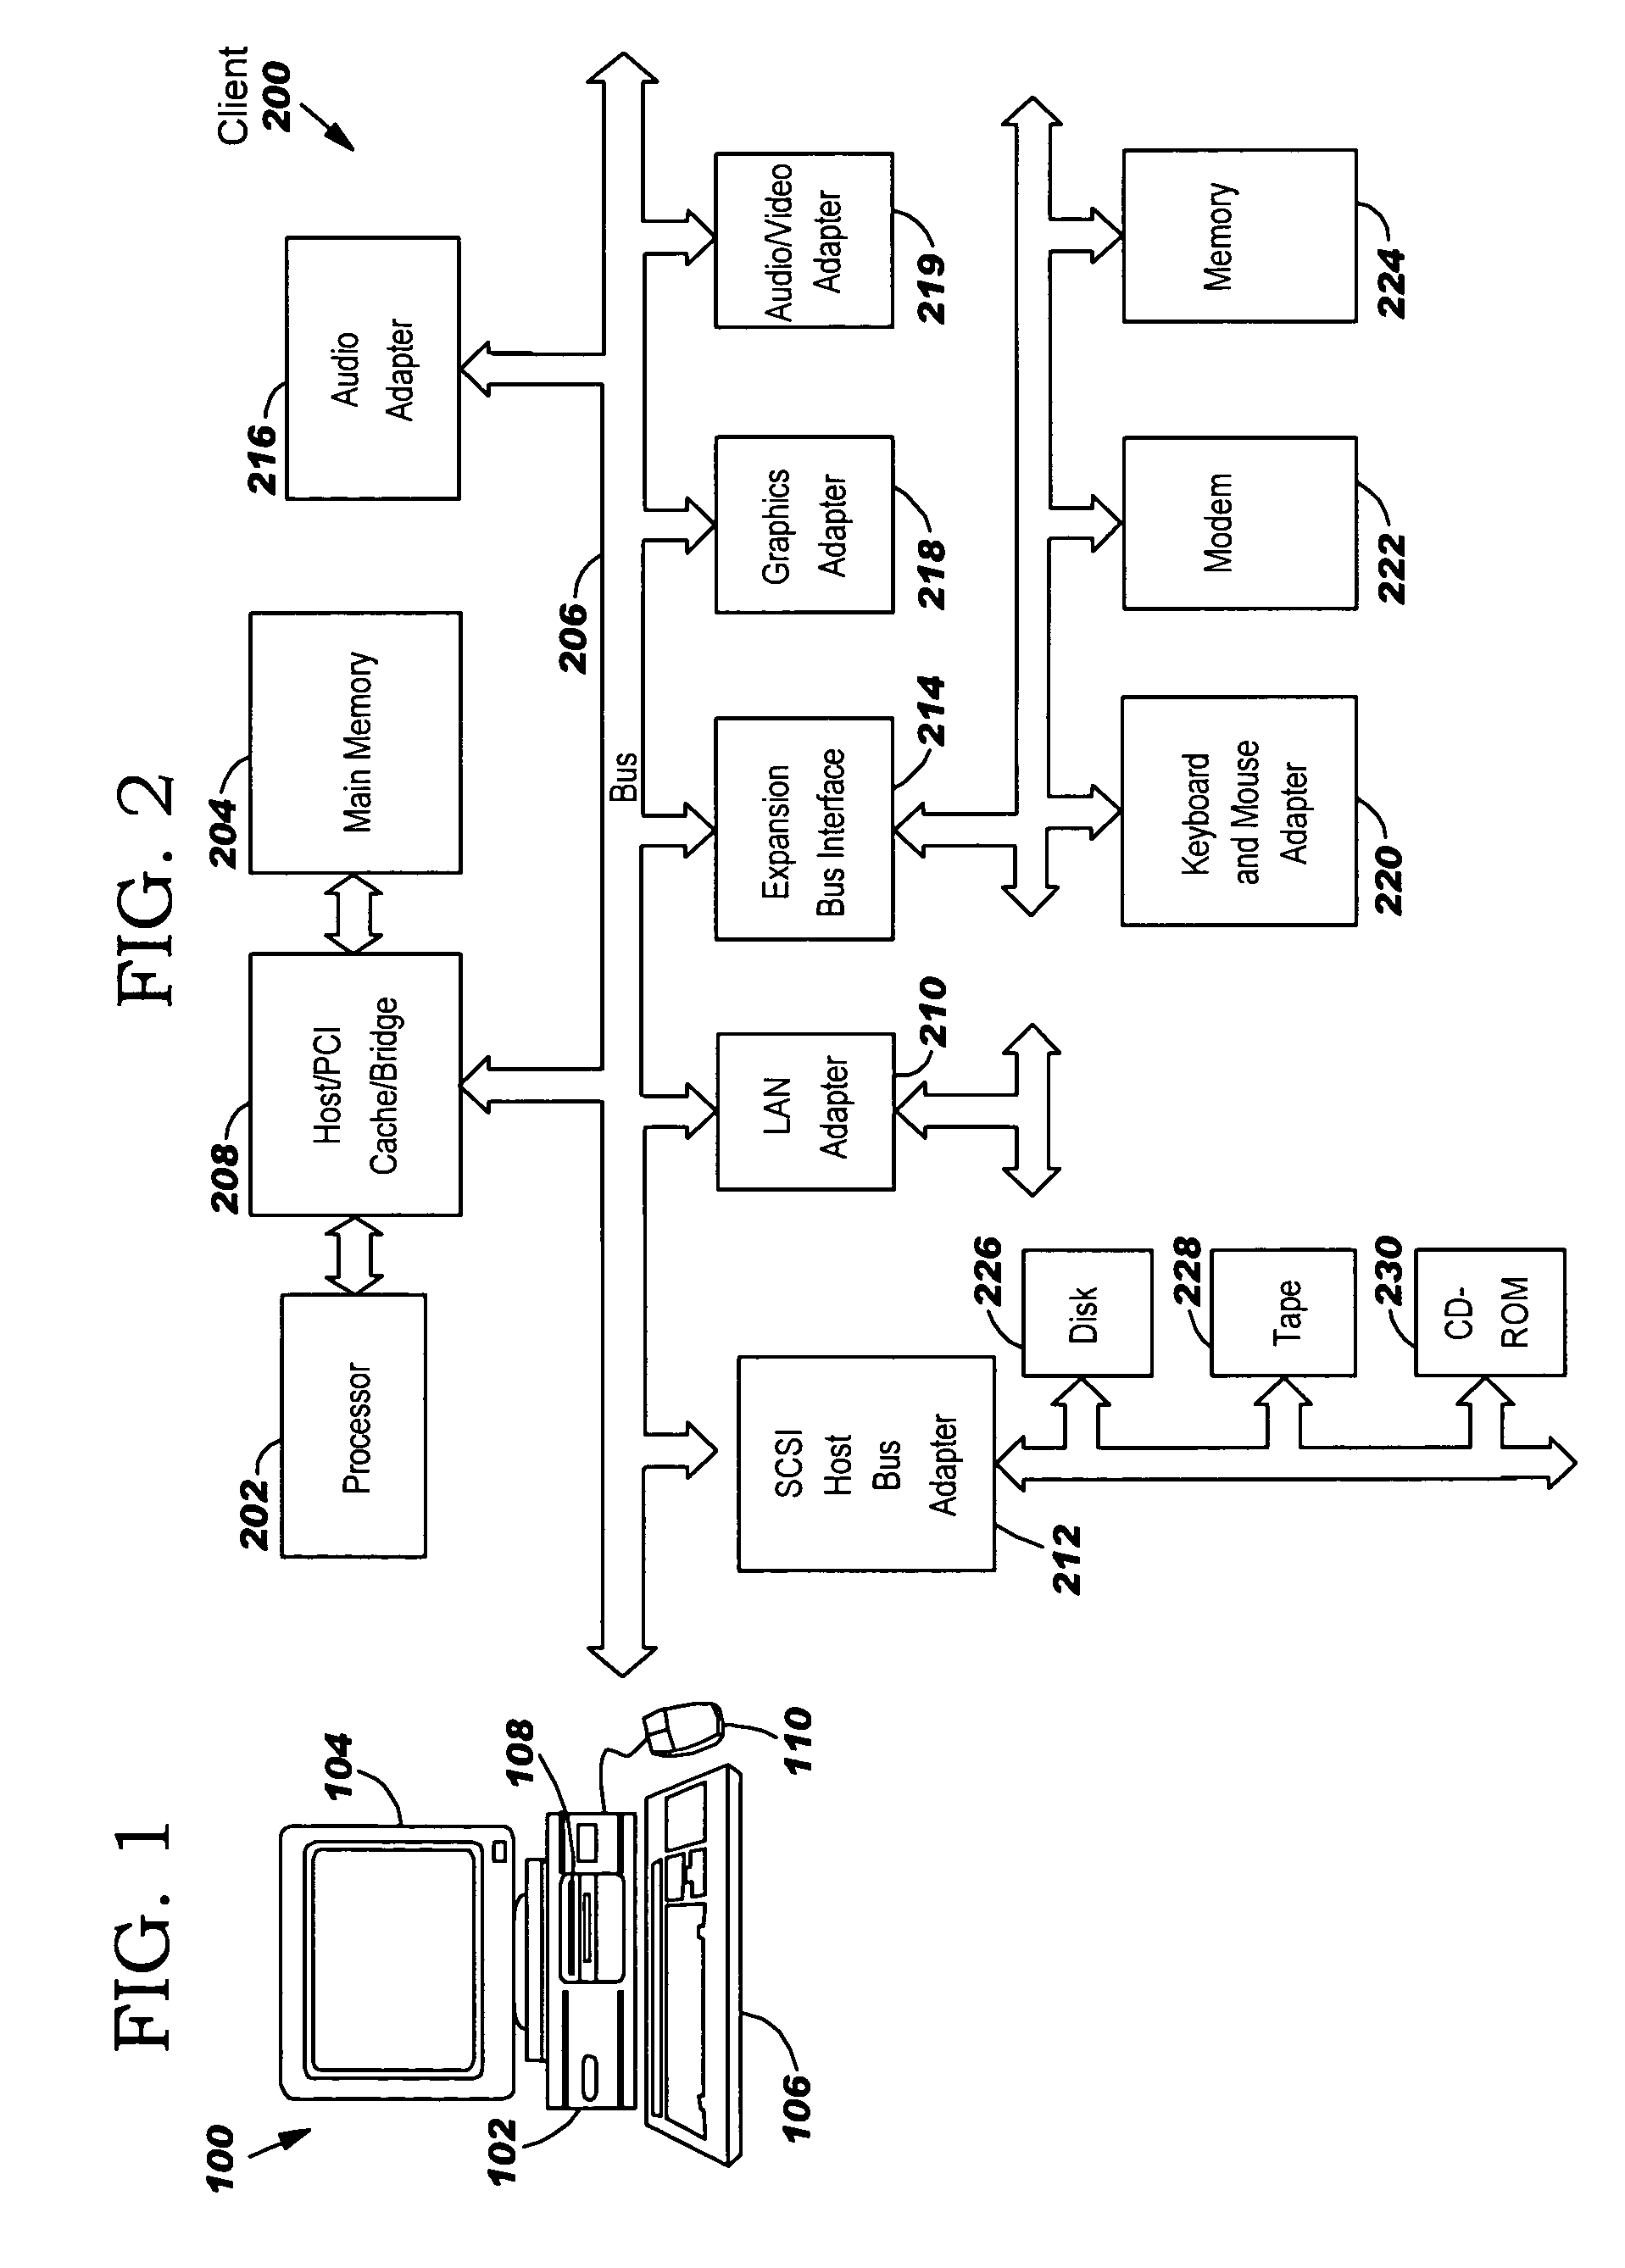 Method and apparatus for implementing dynamic function groups in a data processing system